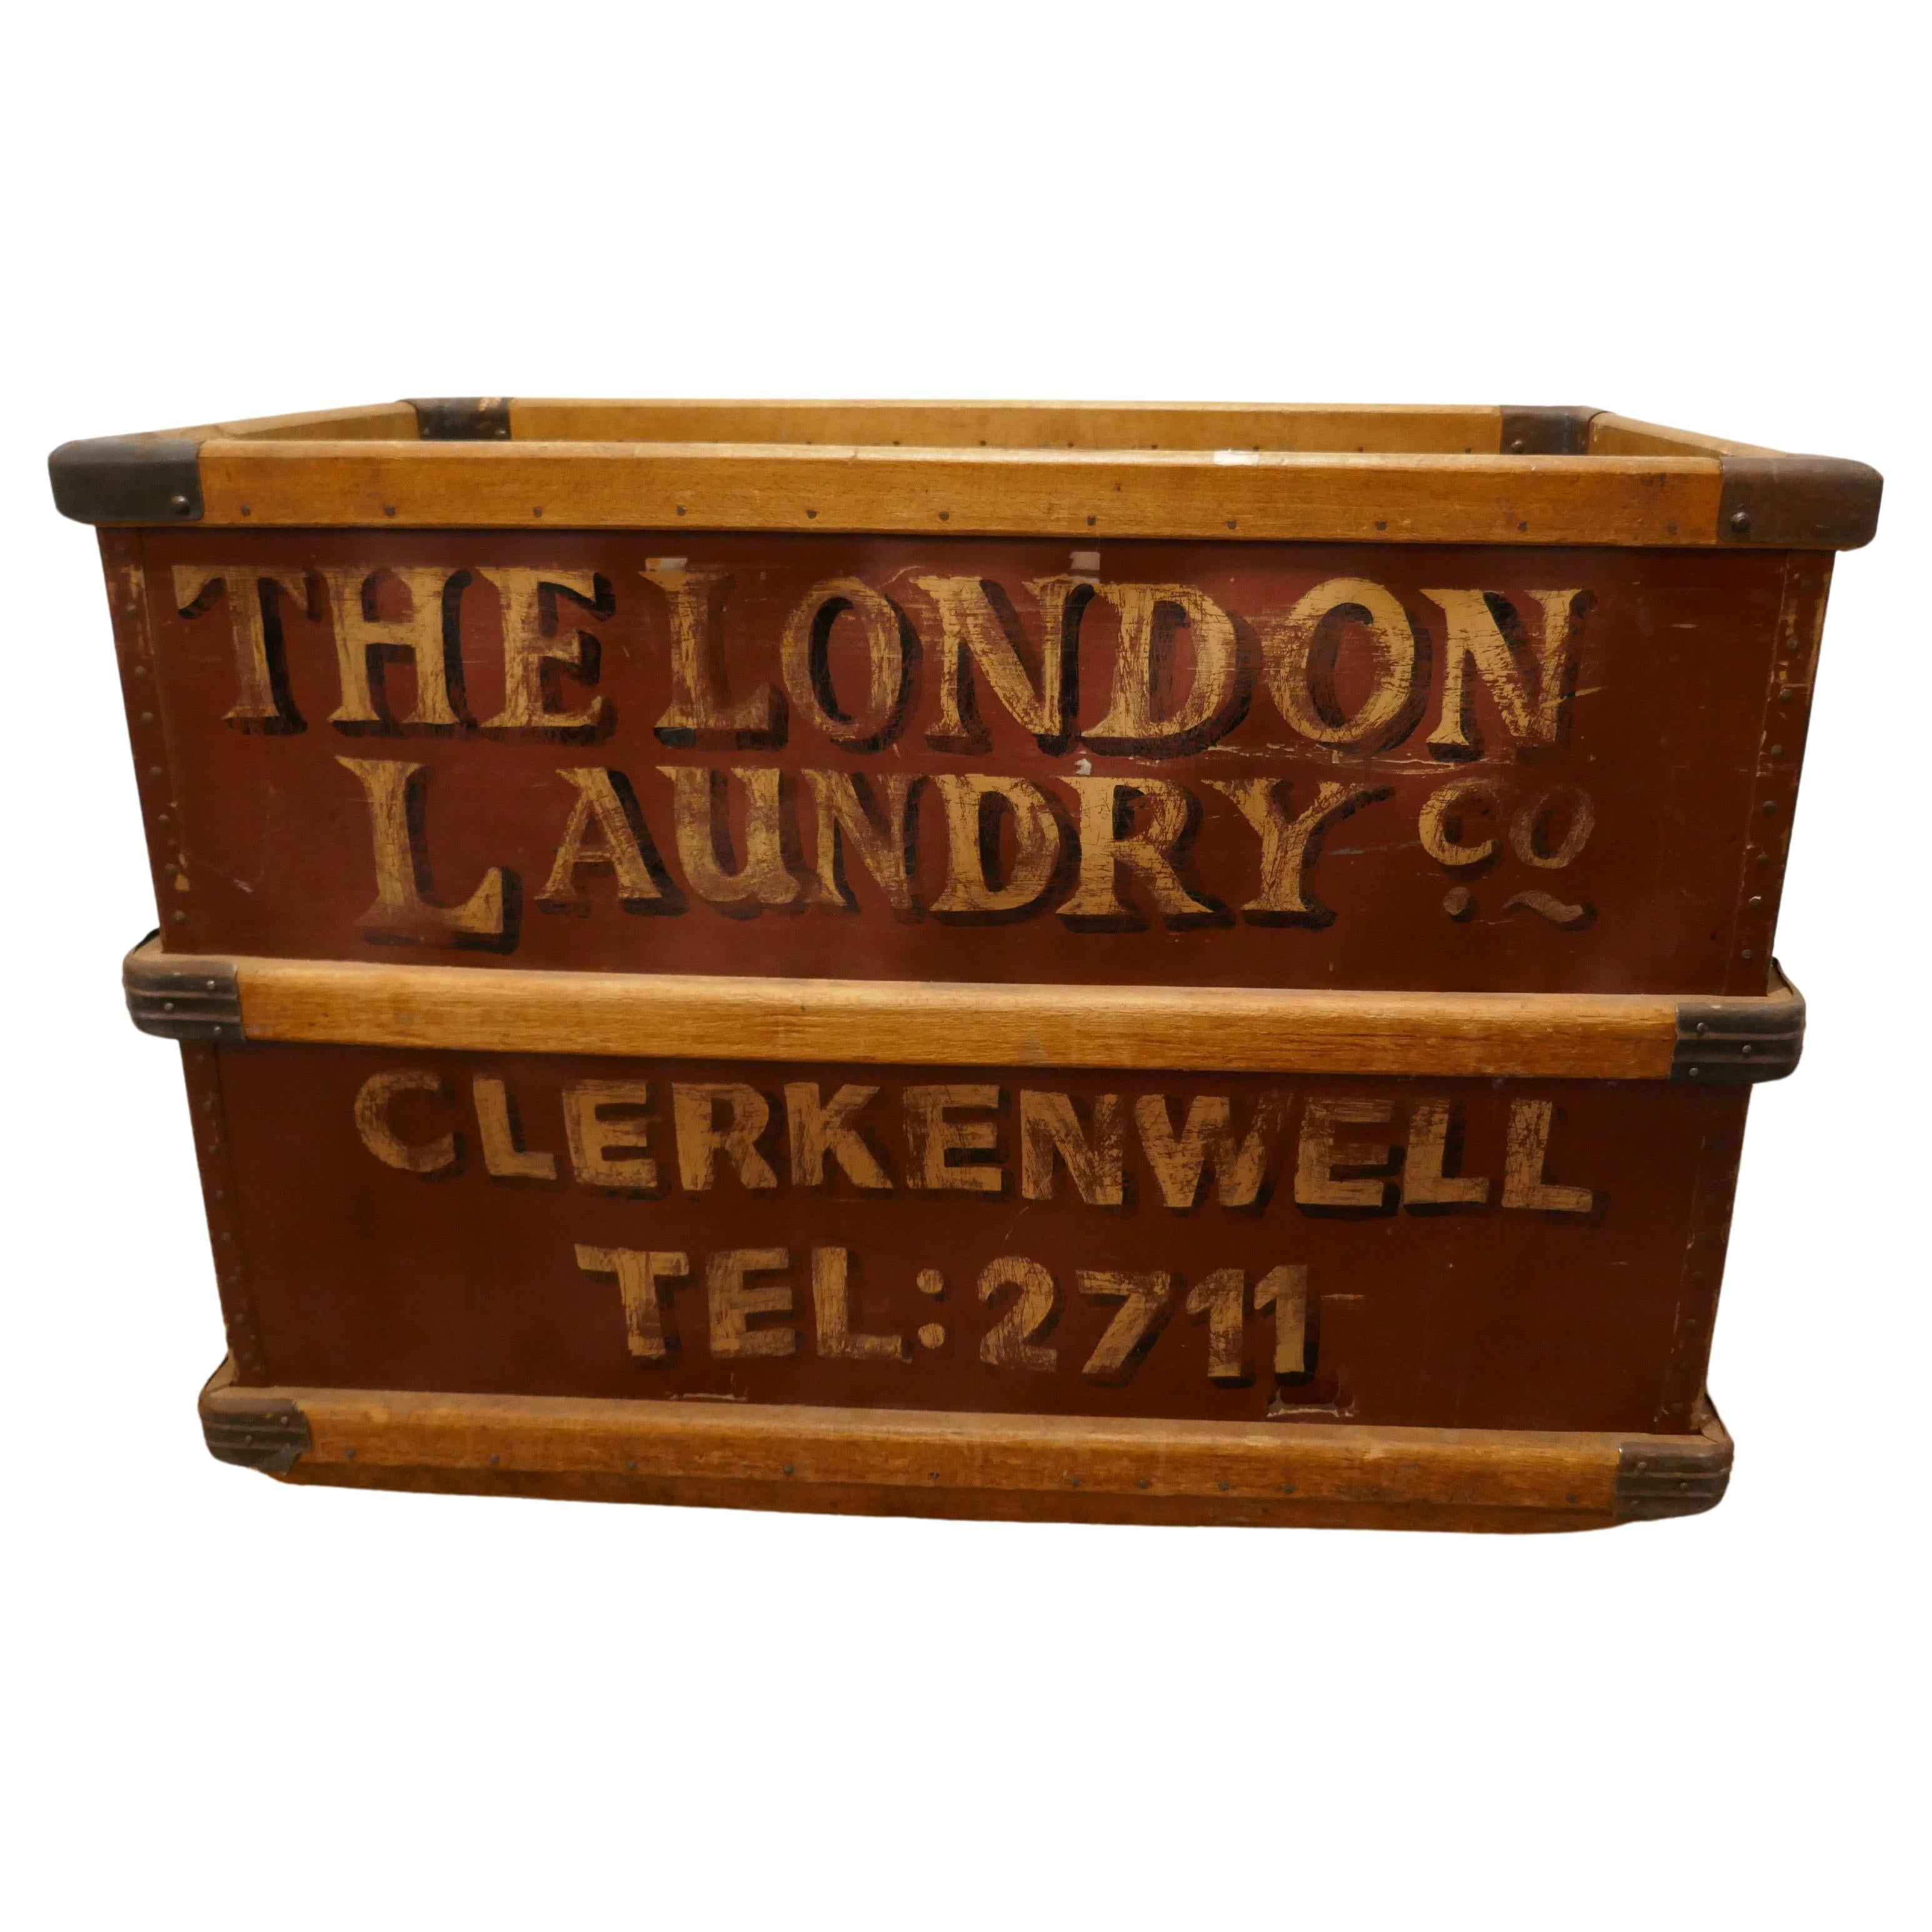 London Laundry Co. Industrial Trolley Cart

 Great piece from the London Laundry Co. Clerkenwell, the cart is made in thick heavy duty parchment and has iron wheels and wooden banding

The Trolley is 33” high, 41” long and 23” wide, it is in well